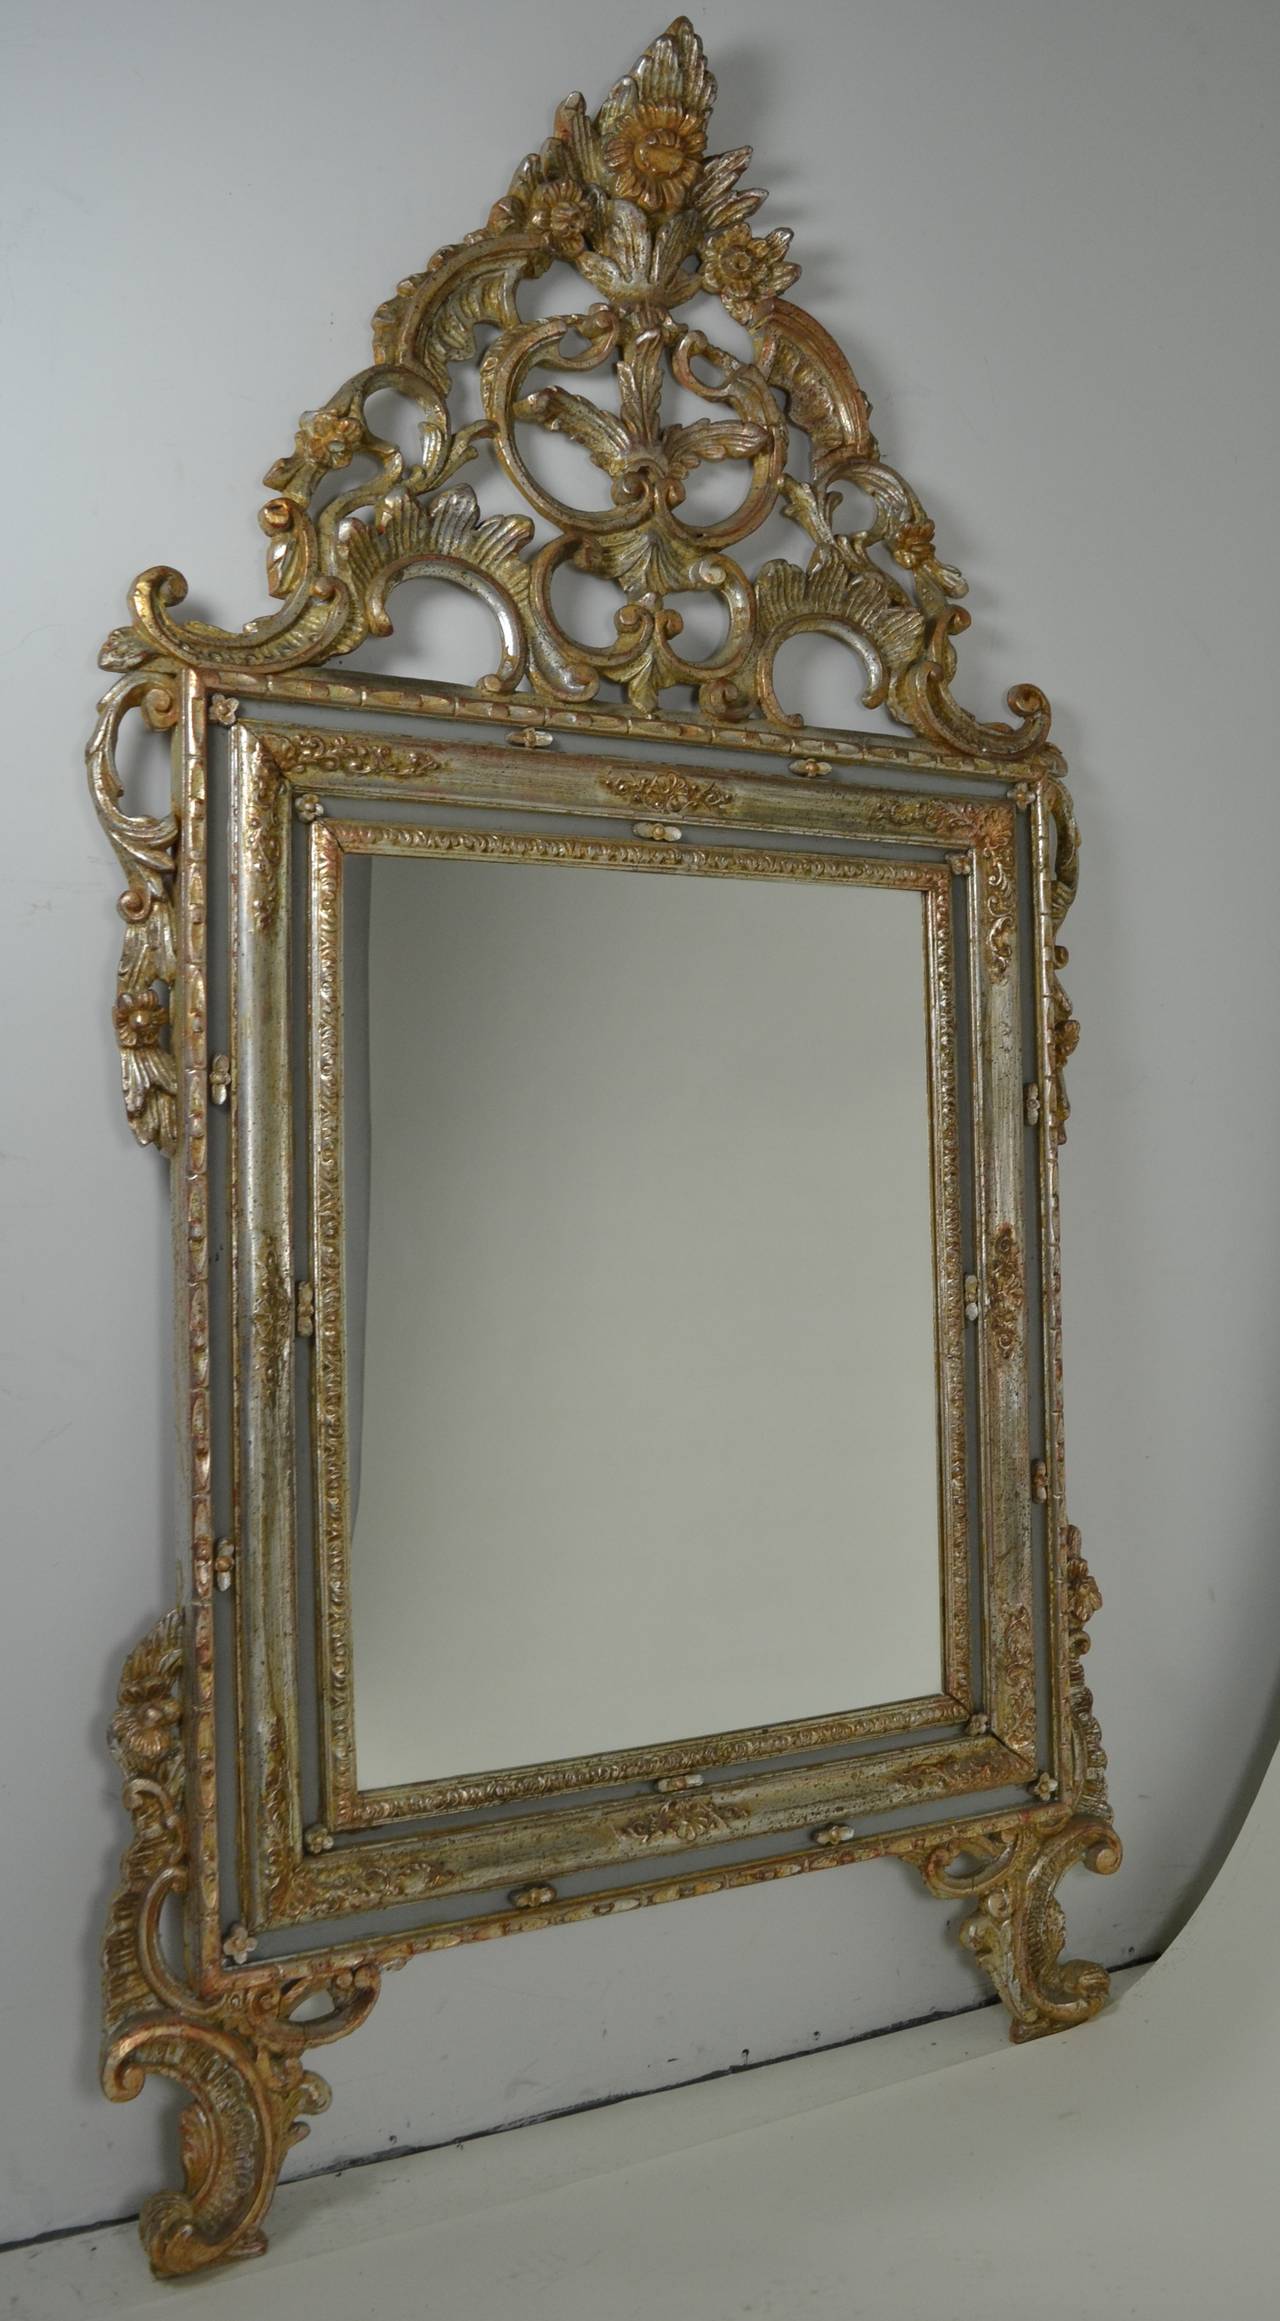 Elaborate carved wood framed mirror in silver and gold gilt. Frosted glass inserts surround the central mirror. Inscribed Made in Italy on verso. Very elaborate crest; almost 6 feet tall.